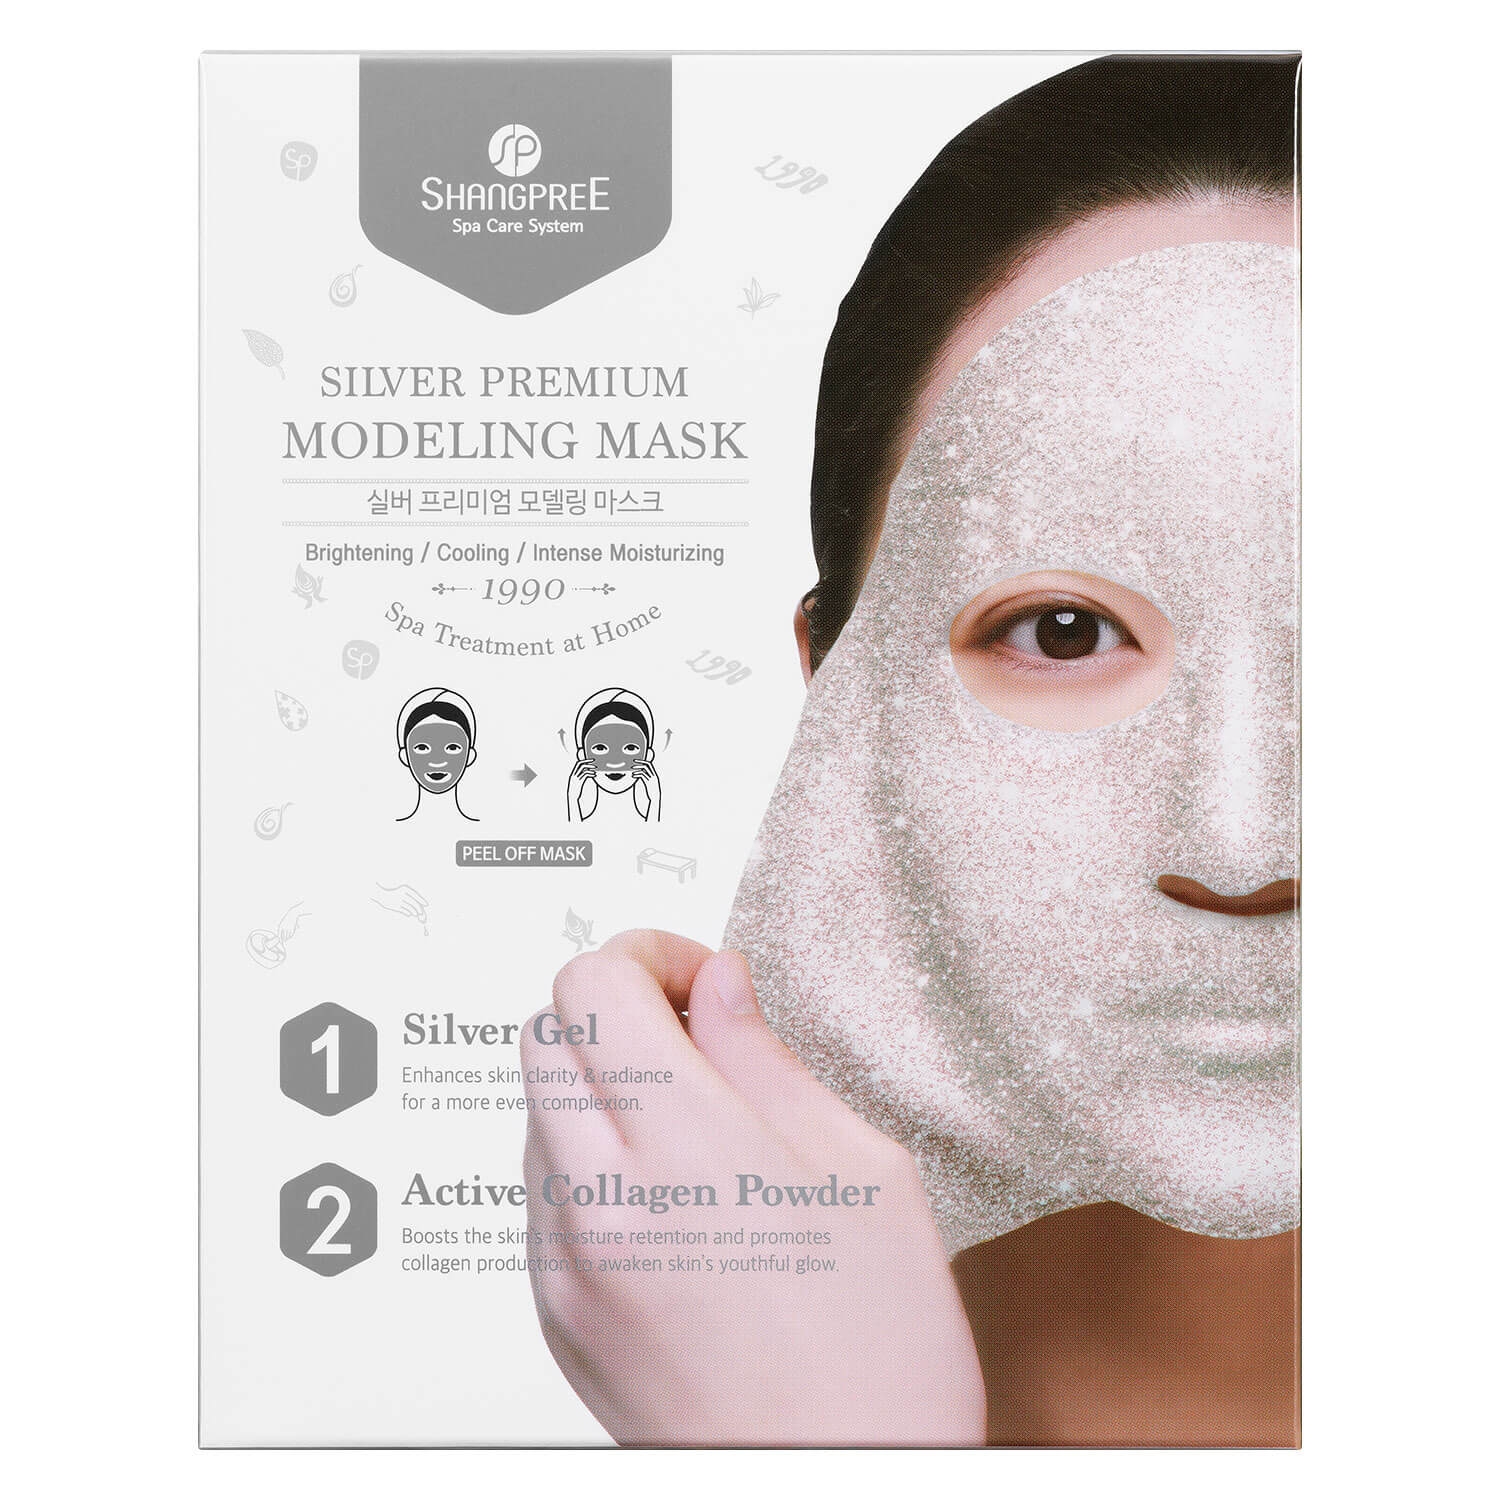 Product image from SHANGPREE - Silver Premium Modeling Mask